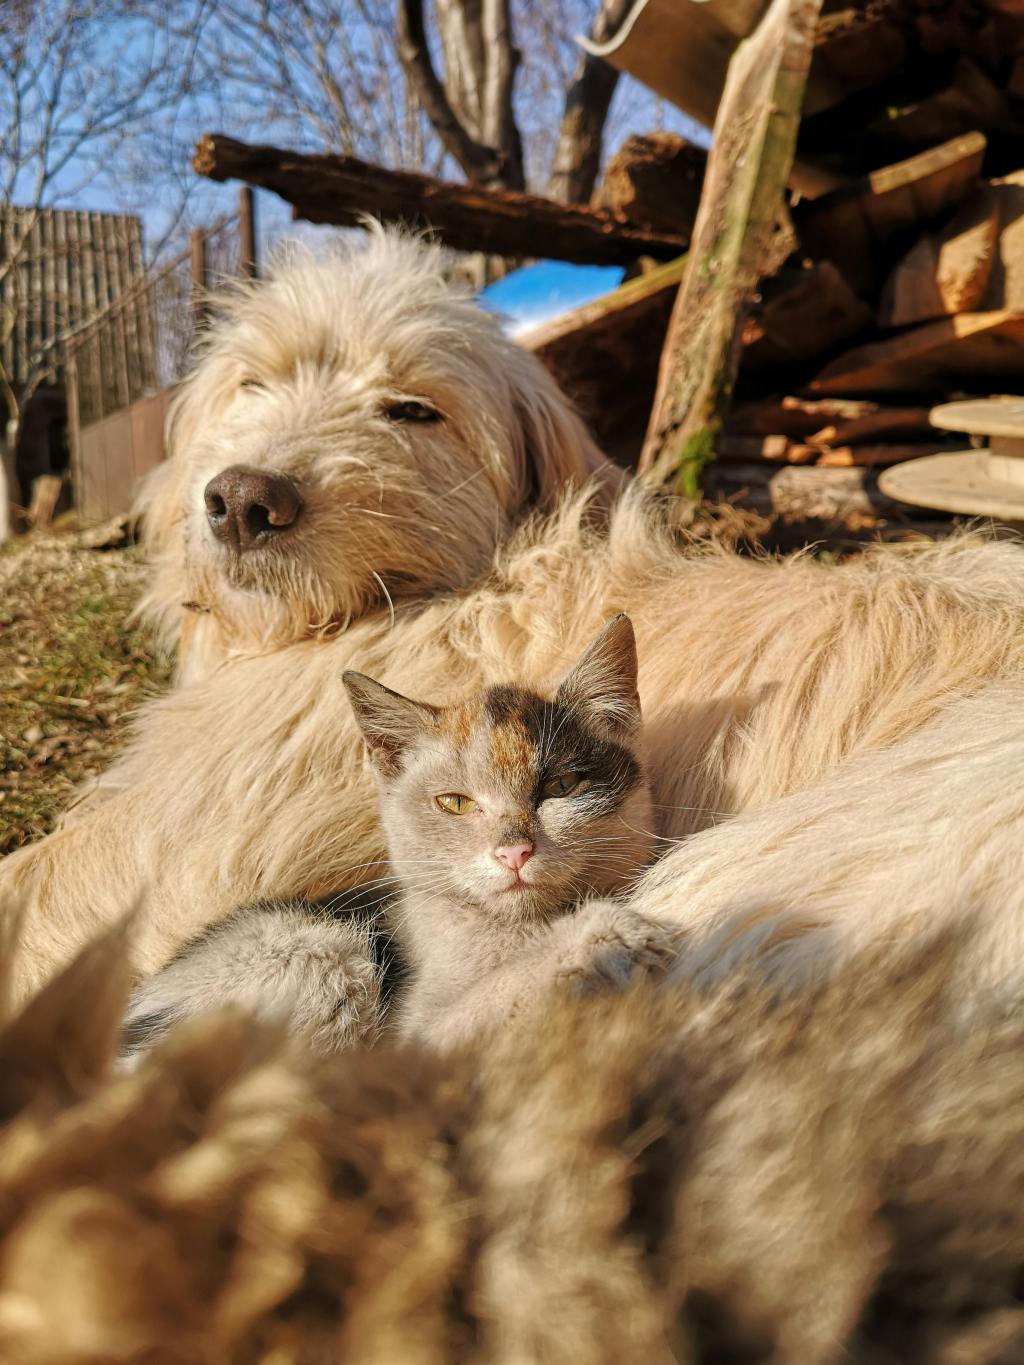 Cat & Dog: A Tail of Unexpected Friendship